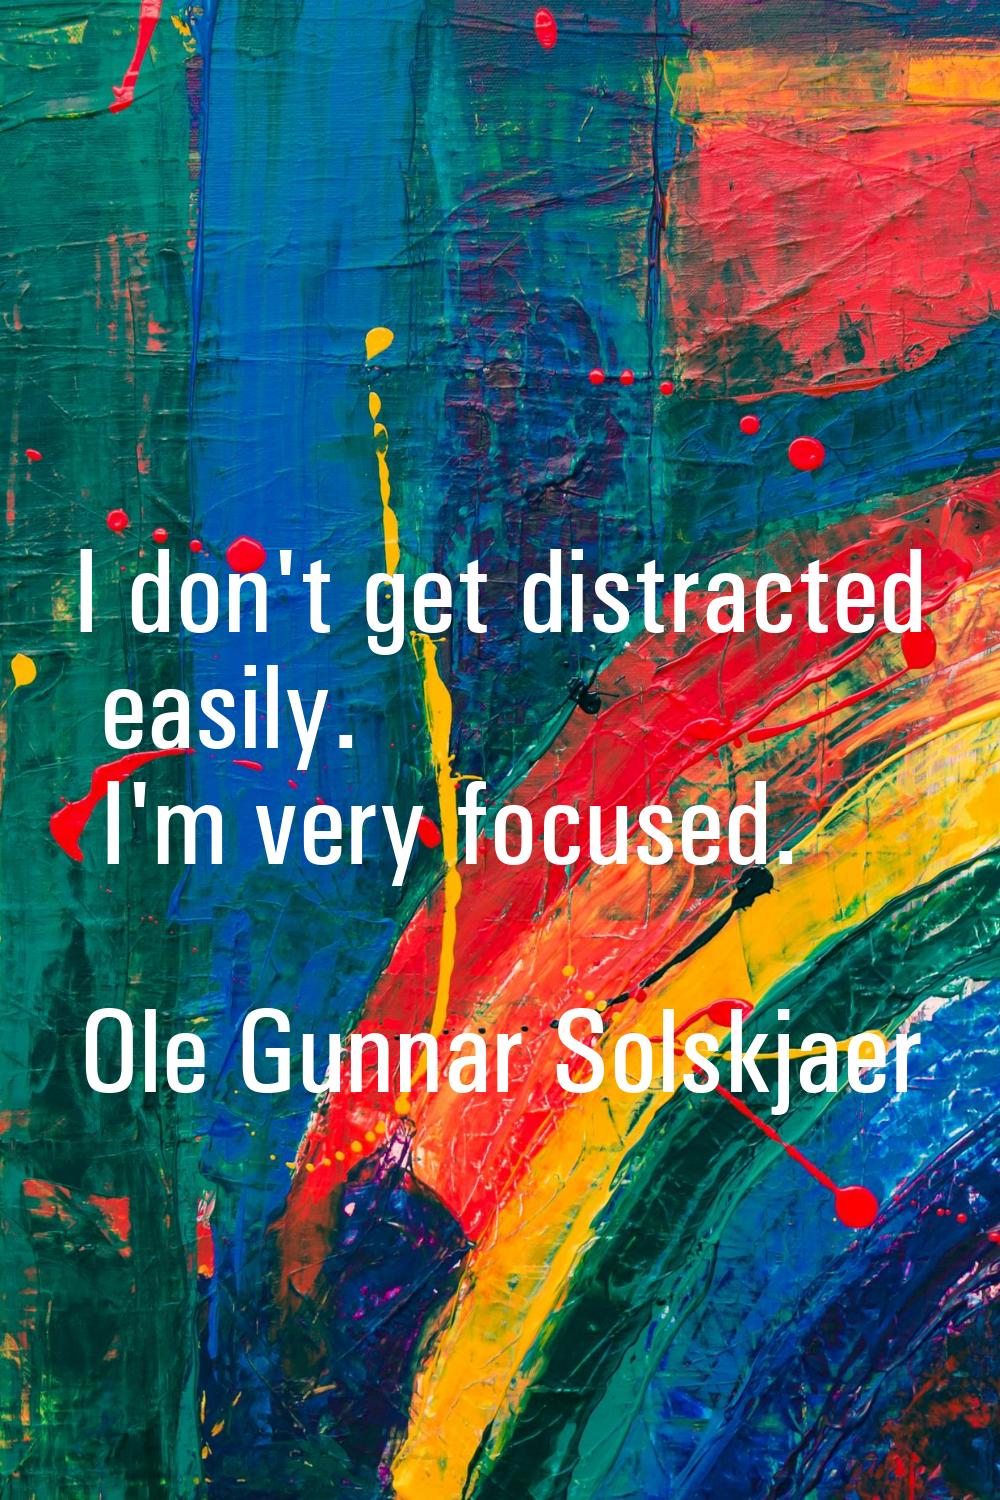 I don't get distracted easily. I'm very focused.